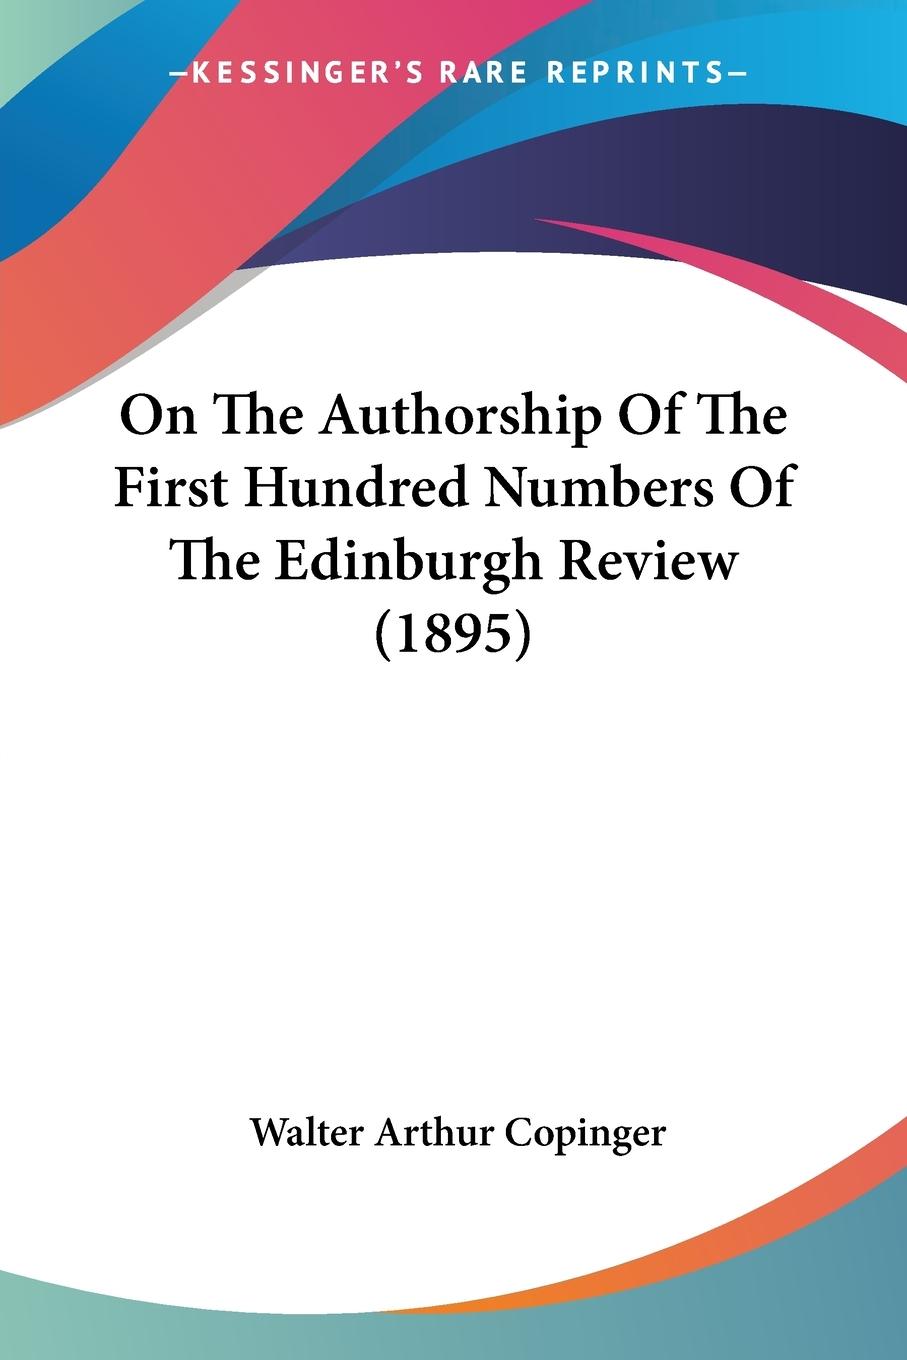 On The Authorship Of The First Hundred Numbers Of The Edinburgh Review (1895) - Copinger, Walter Arthur